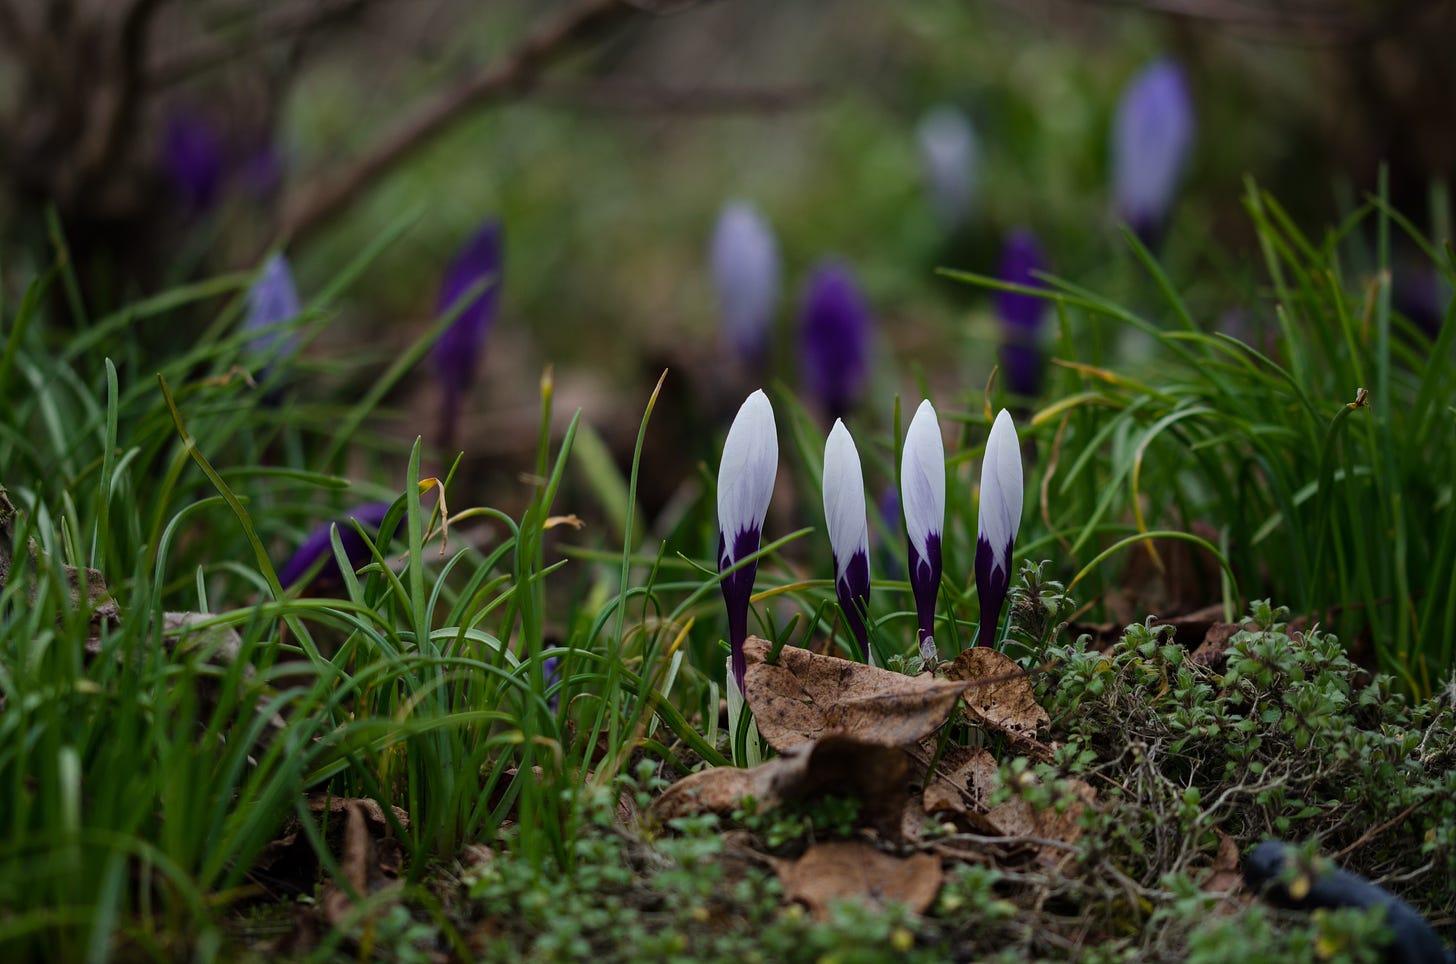 Four purple and white crocuses, emerging from the undergrowth, still tightly furled